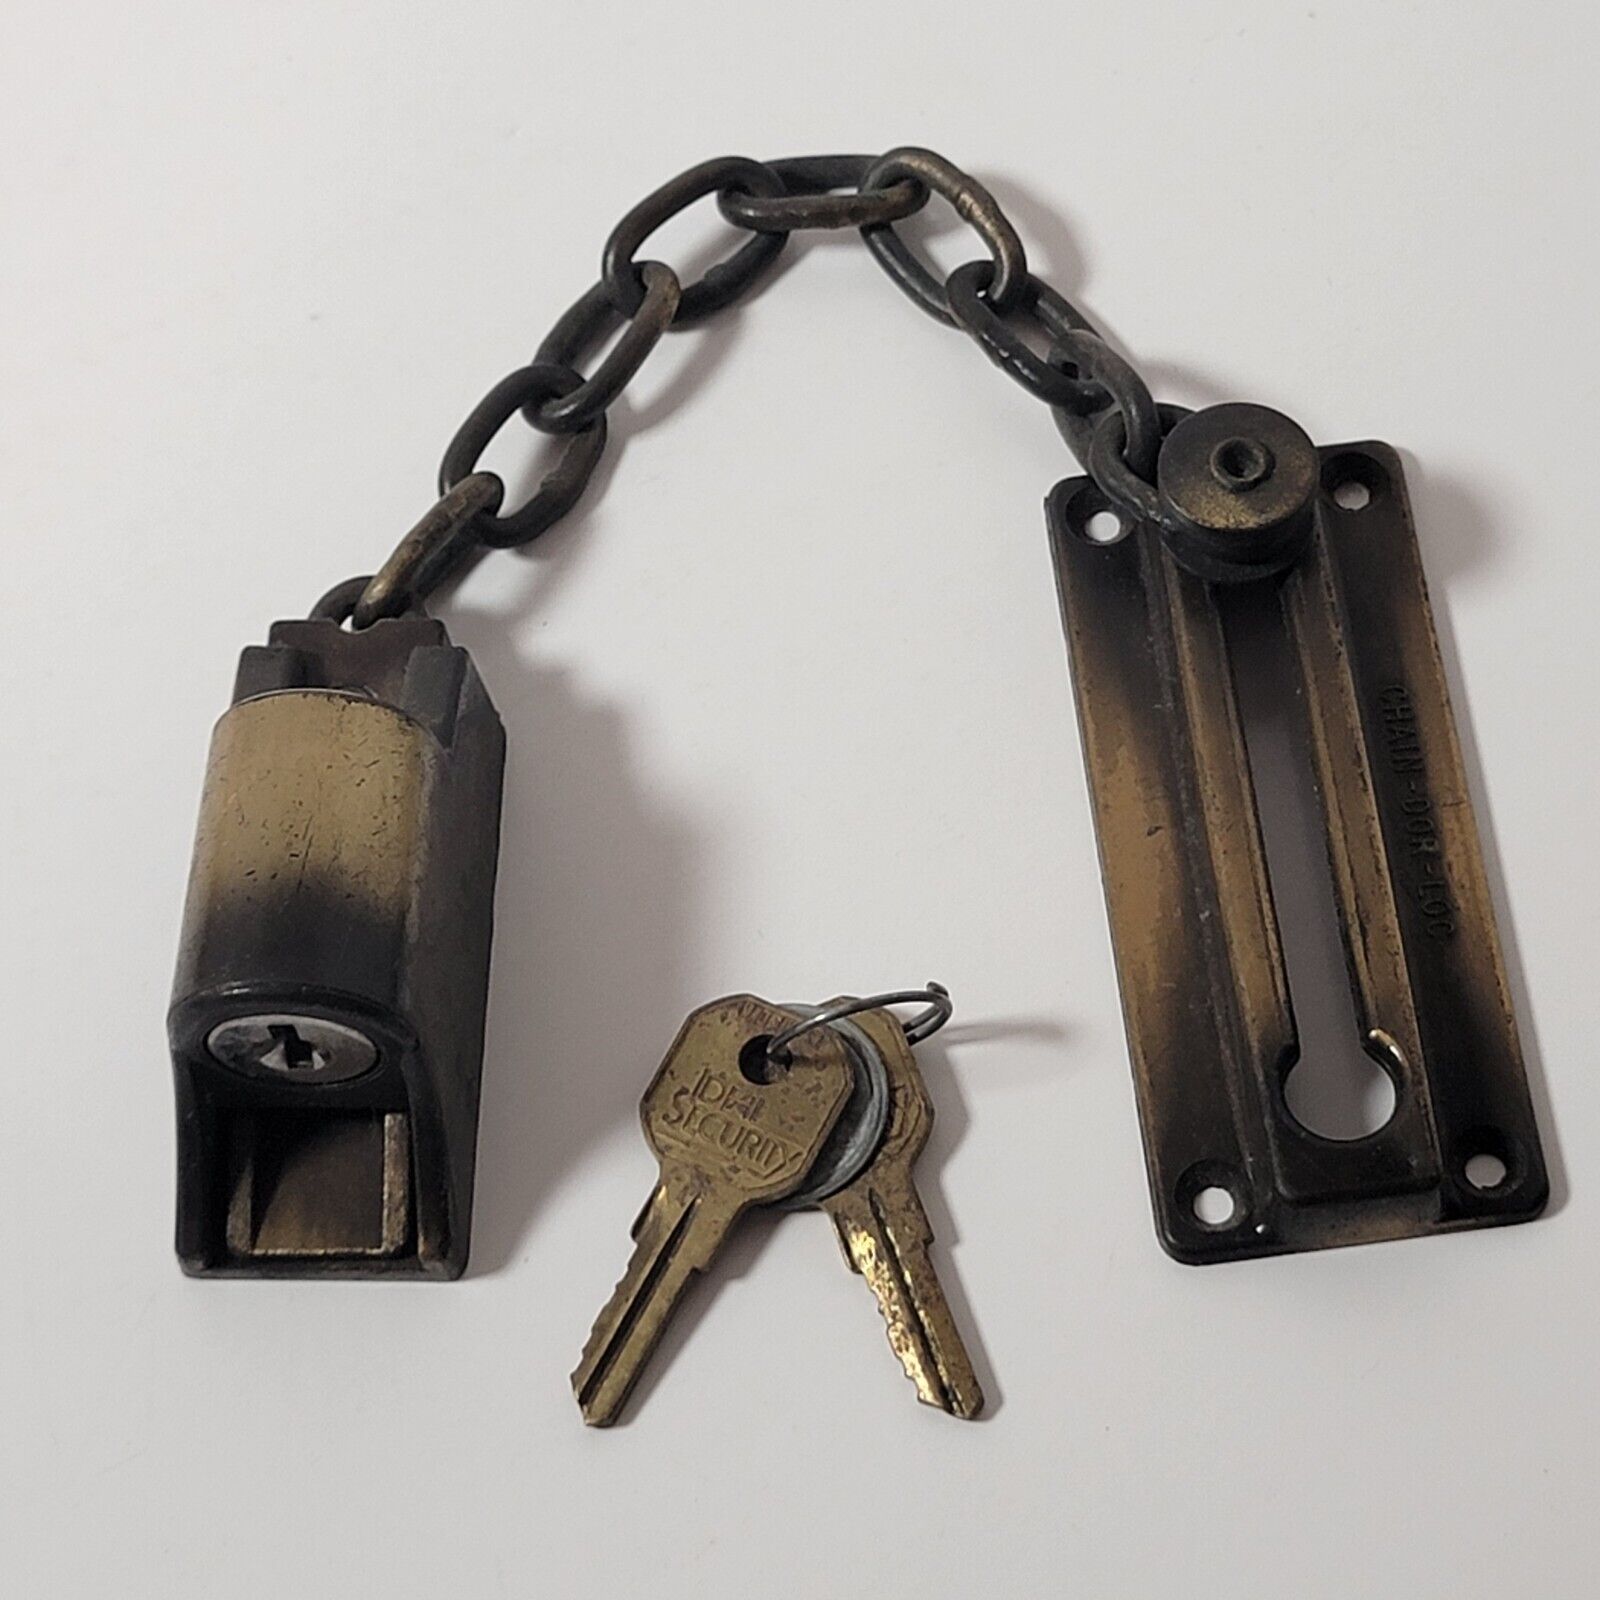 Vintage Ideal Security Chain-Dor-Loc With Two Keys